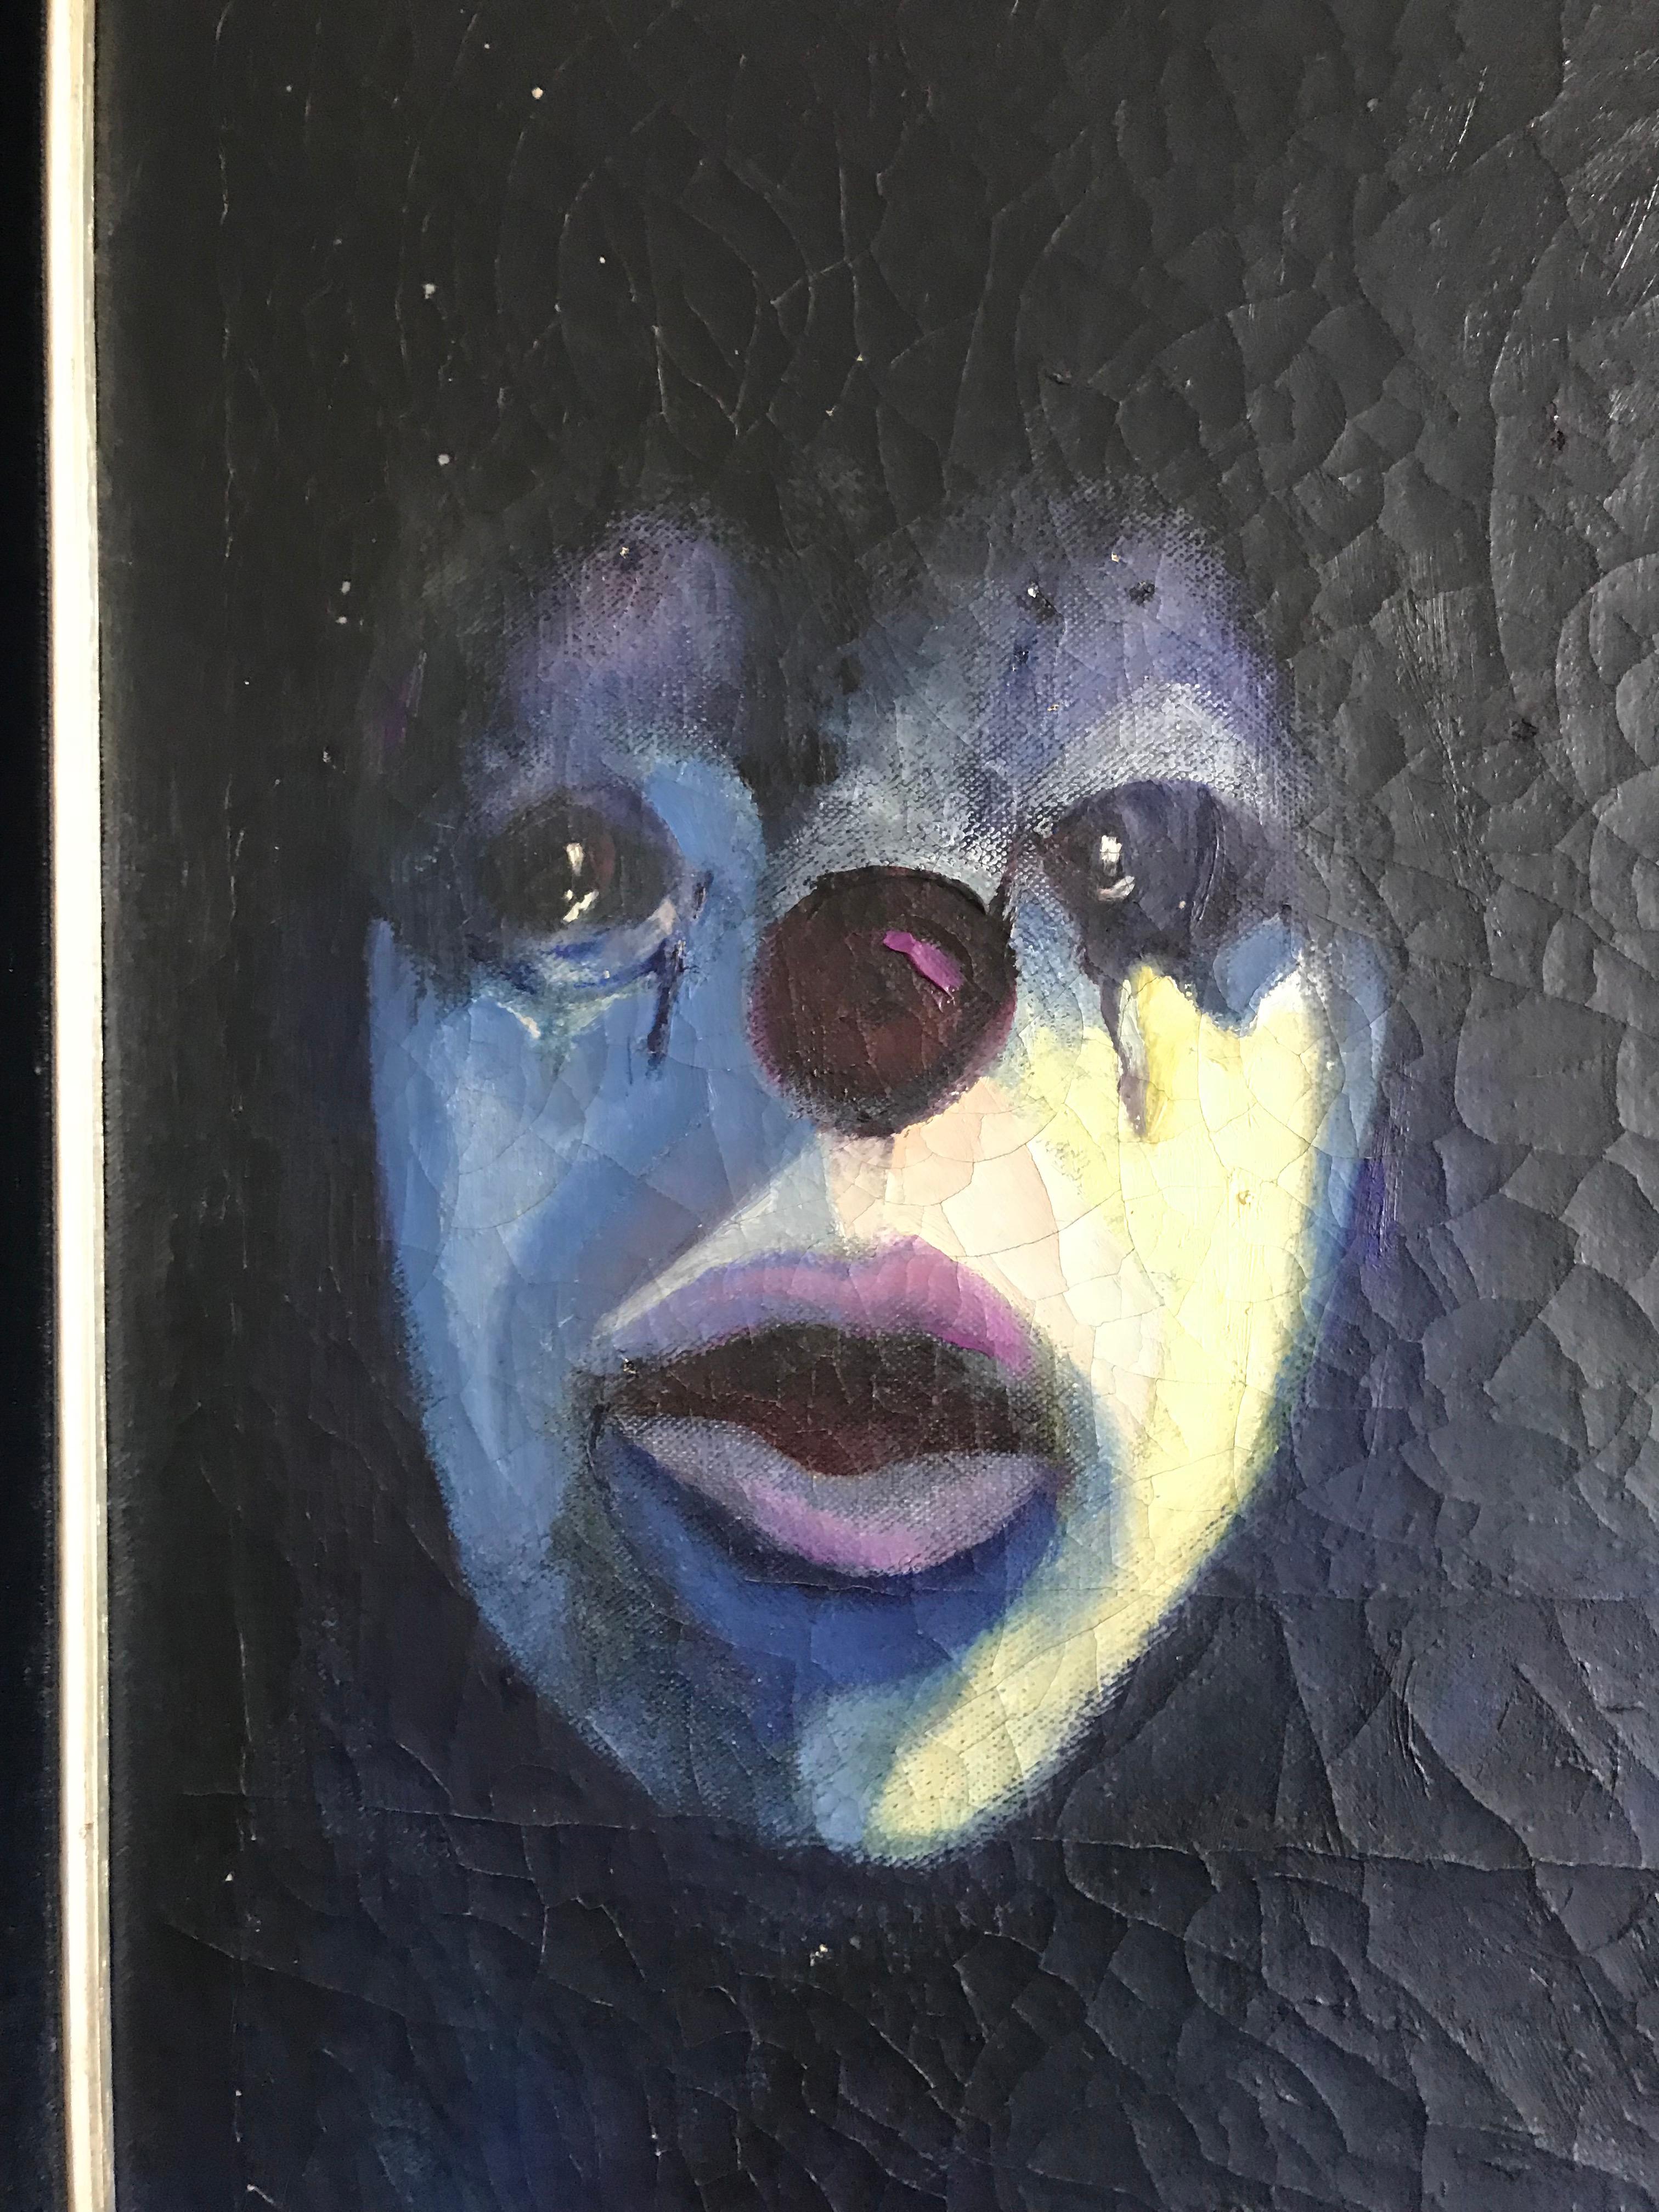 Belgian Antique Oil on Canvas Painting Showing Emotional Clown / Mime Masks by I. Weyts For Sale